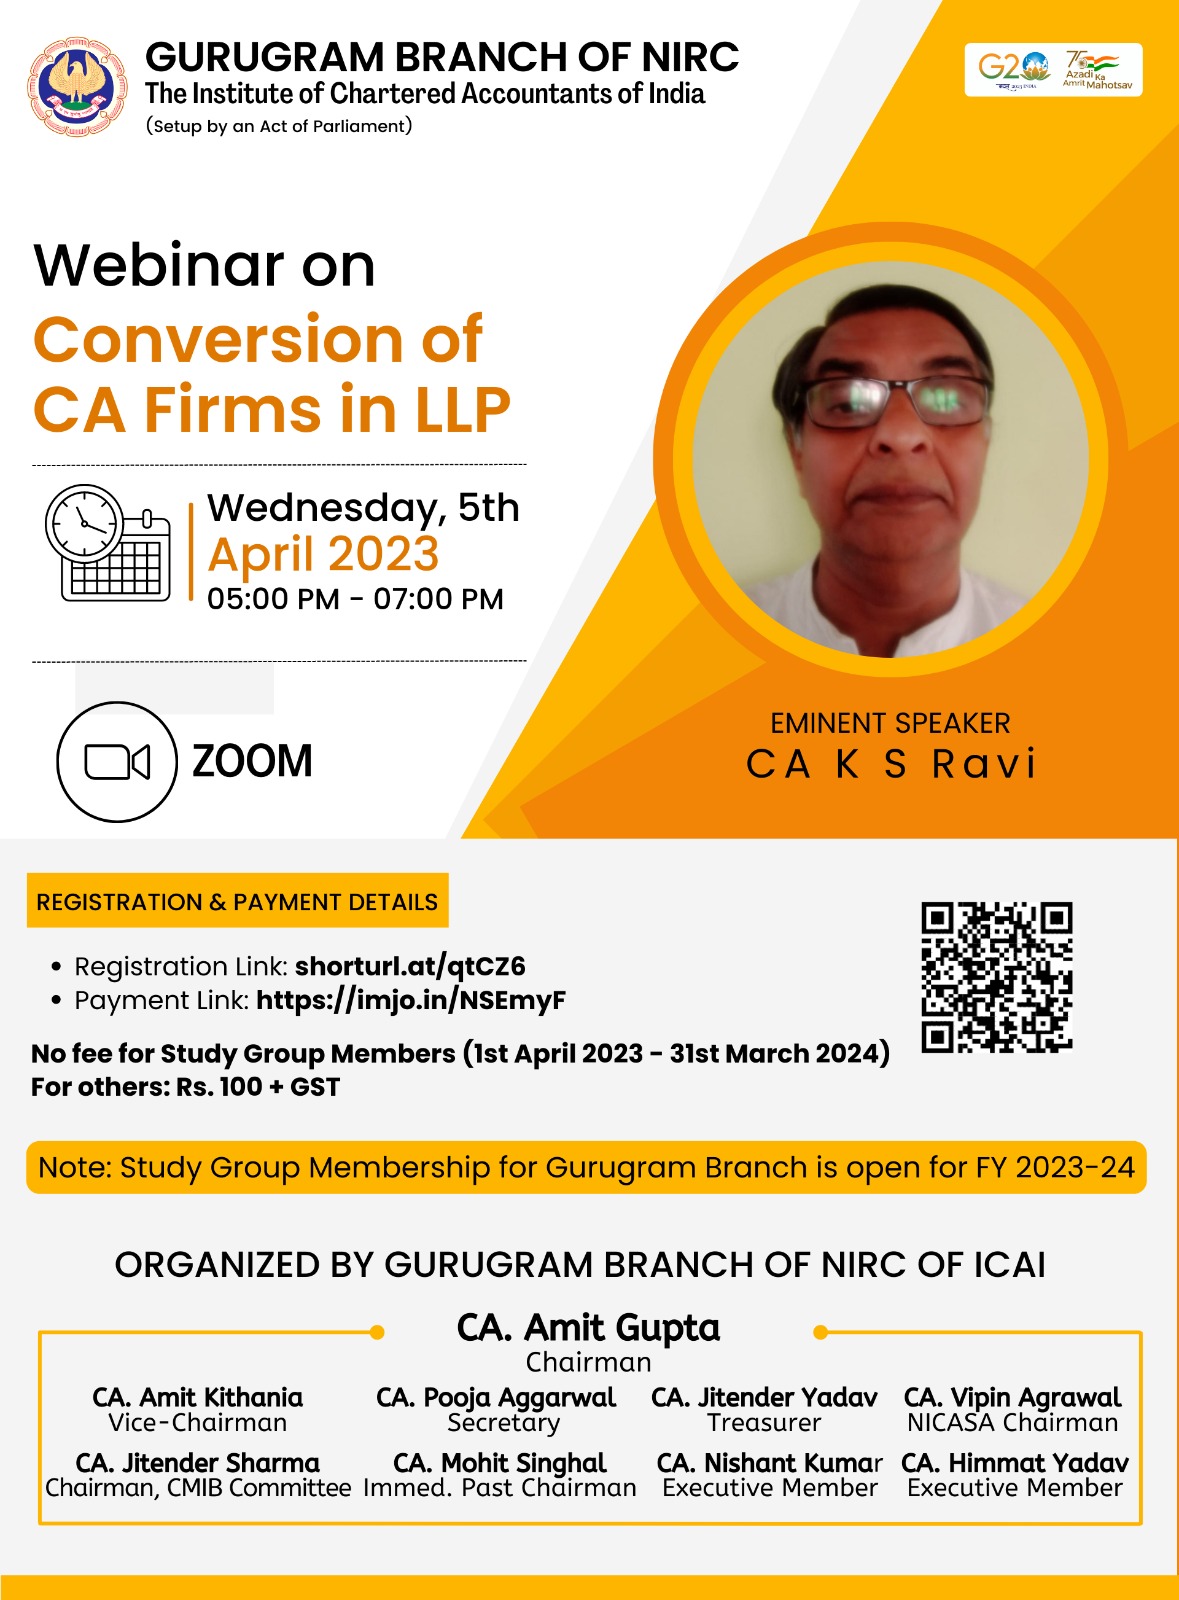 Webinar on Conversion of CA Firms in LLP